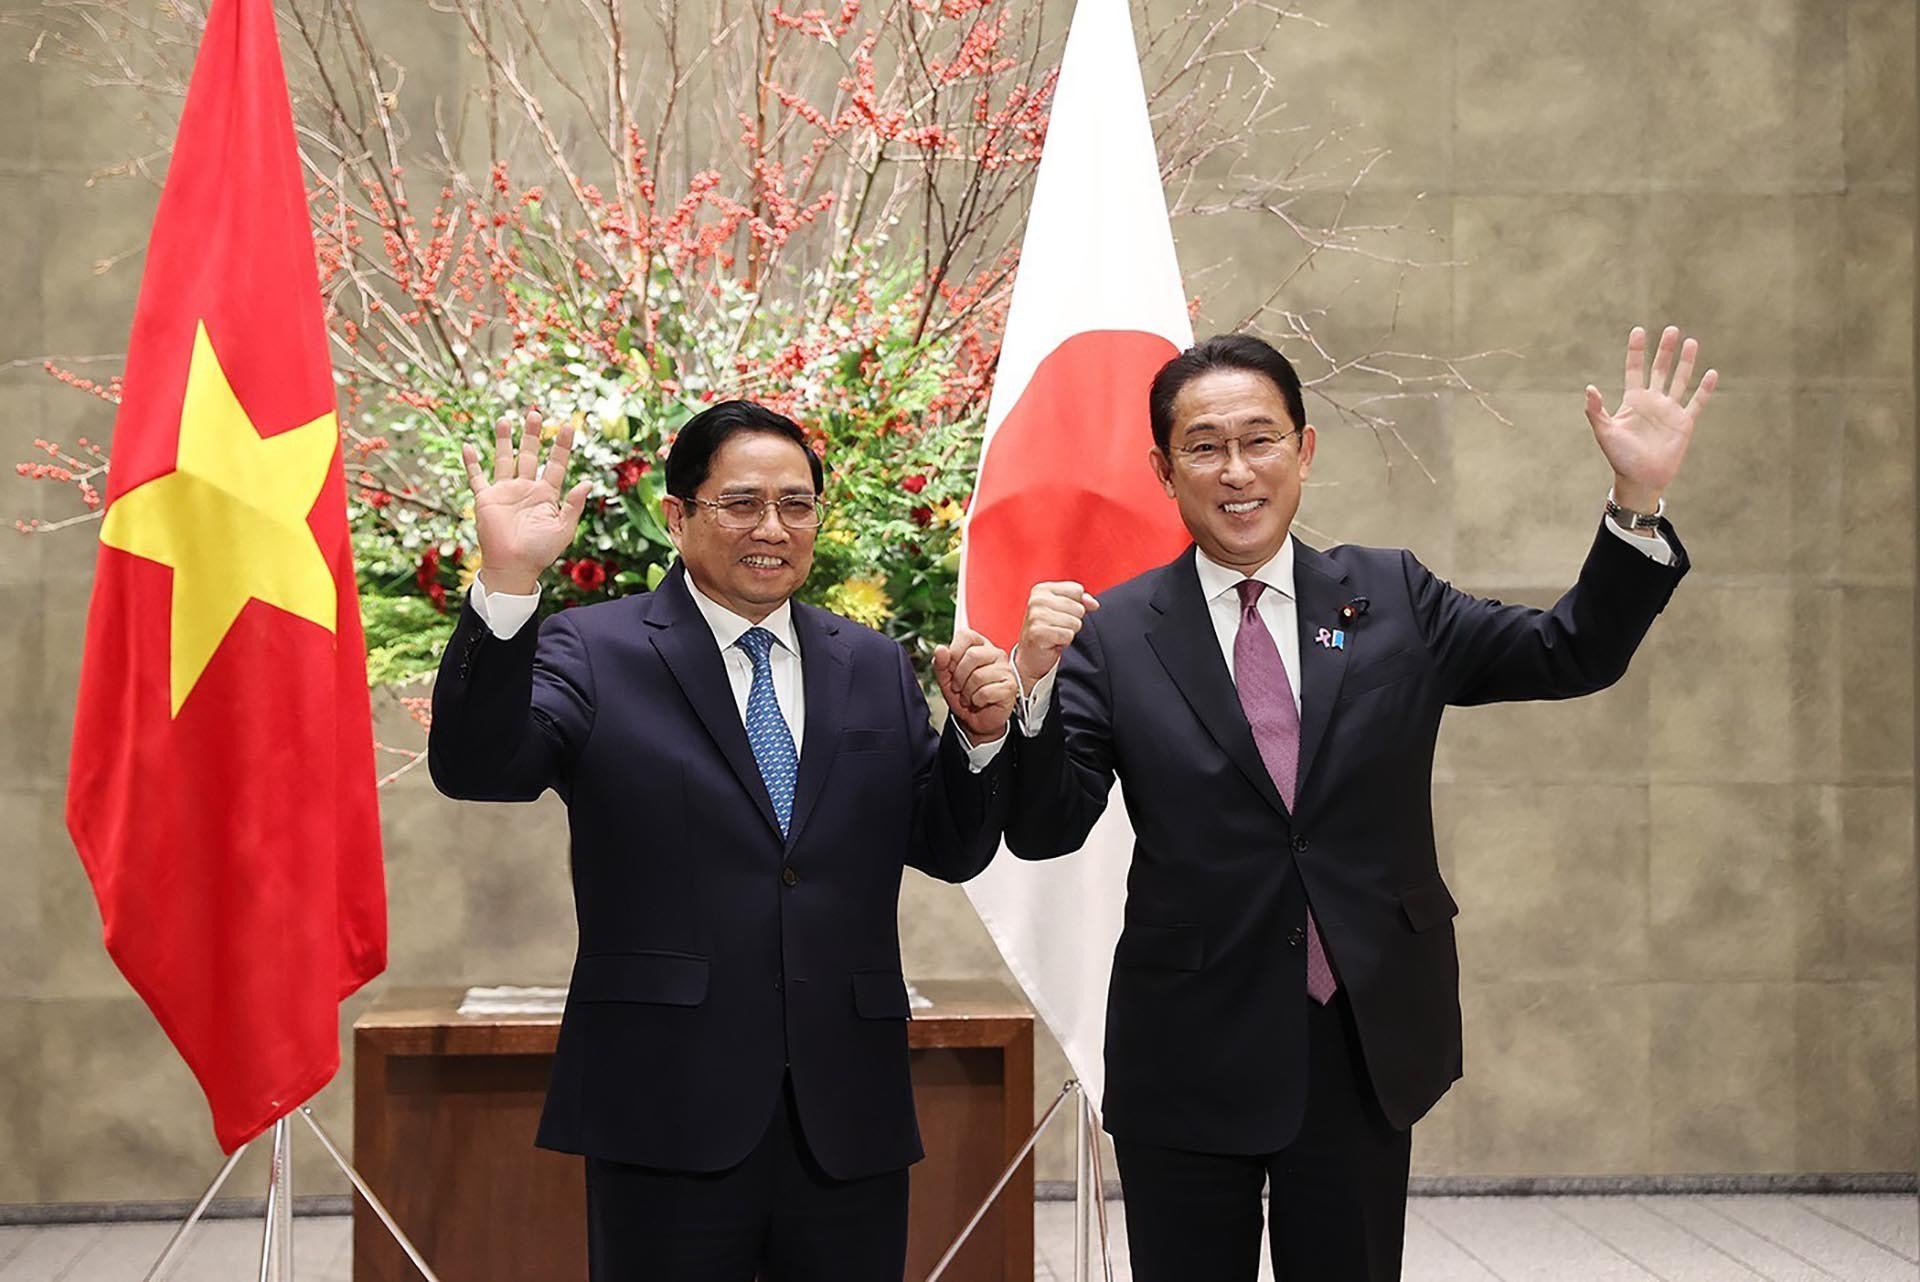 Viet Nam considers Japan a long-term, important and reliable strategic partner: Prime Minister